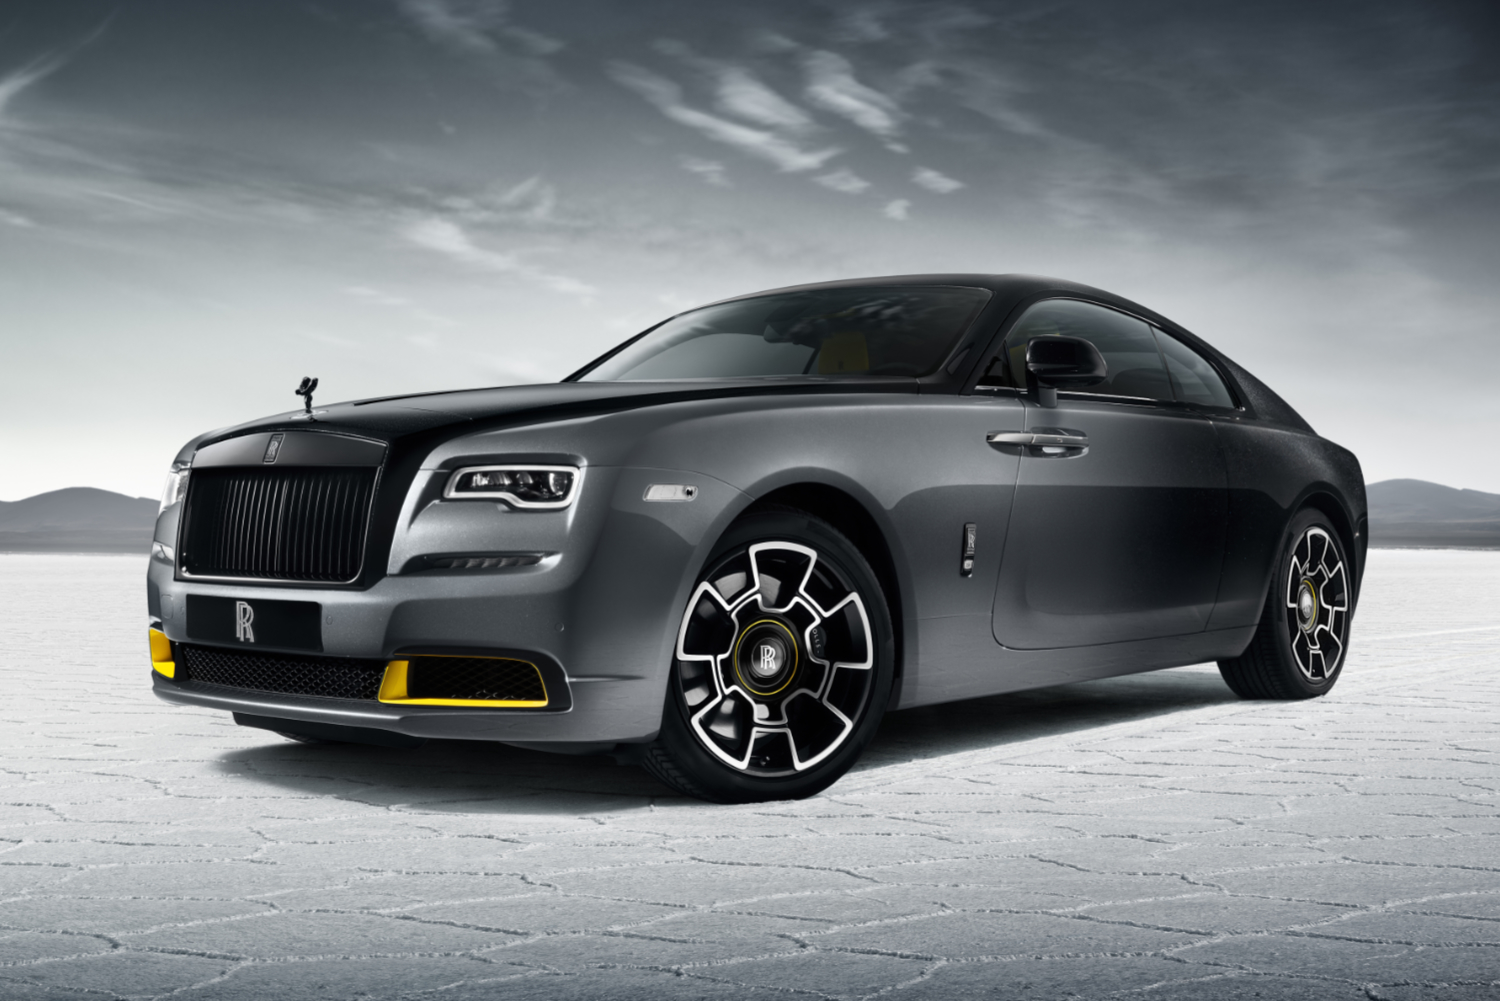 Rolls waves off the Wraith with Black Arrow. Image by Rolls-Royce.